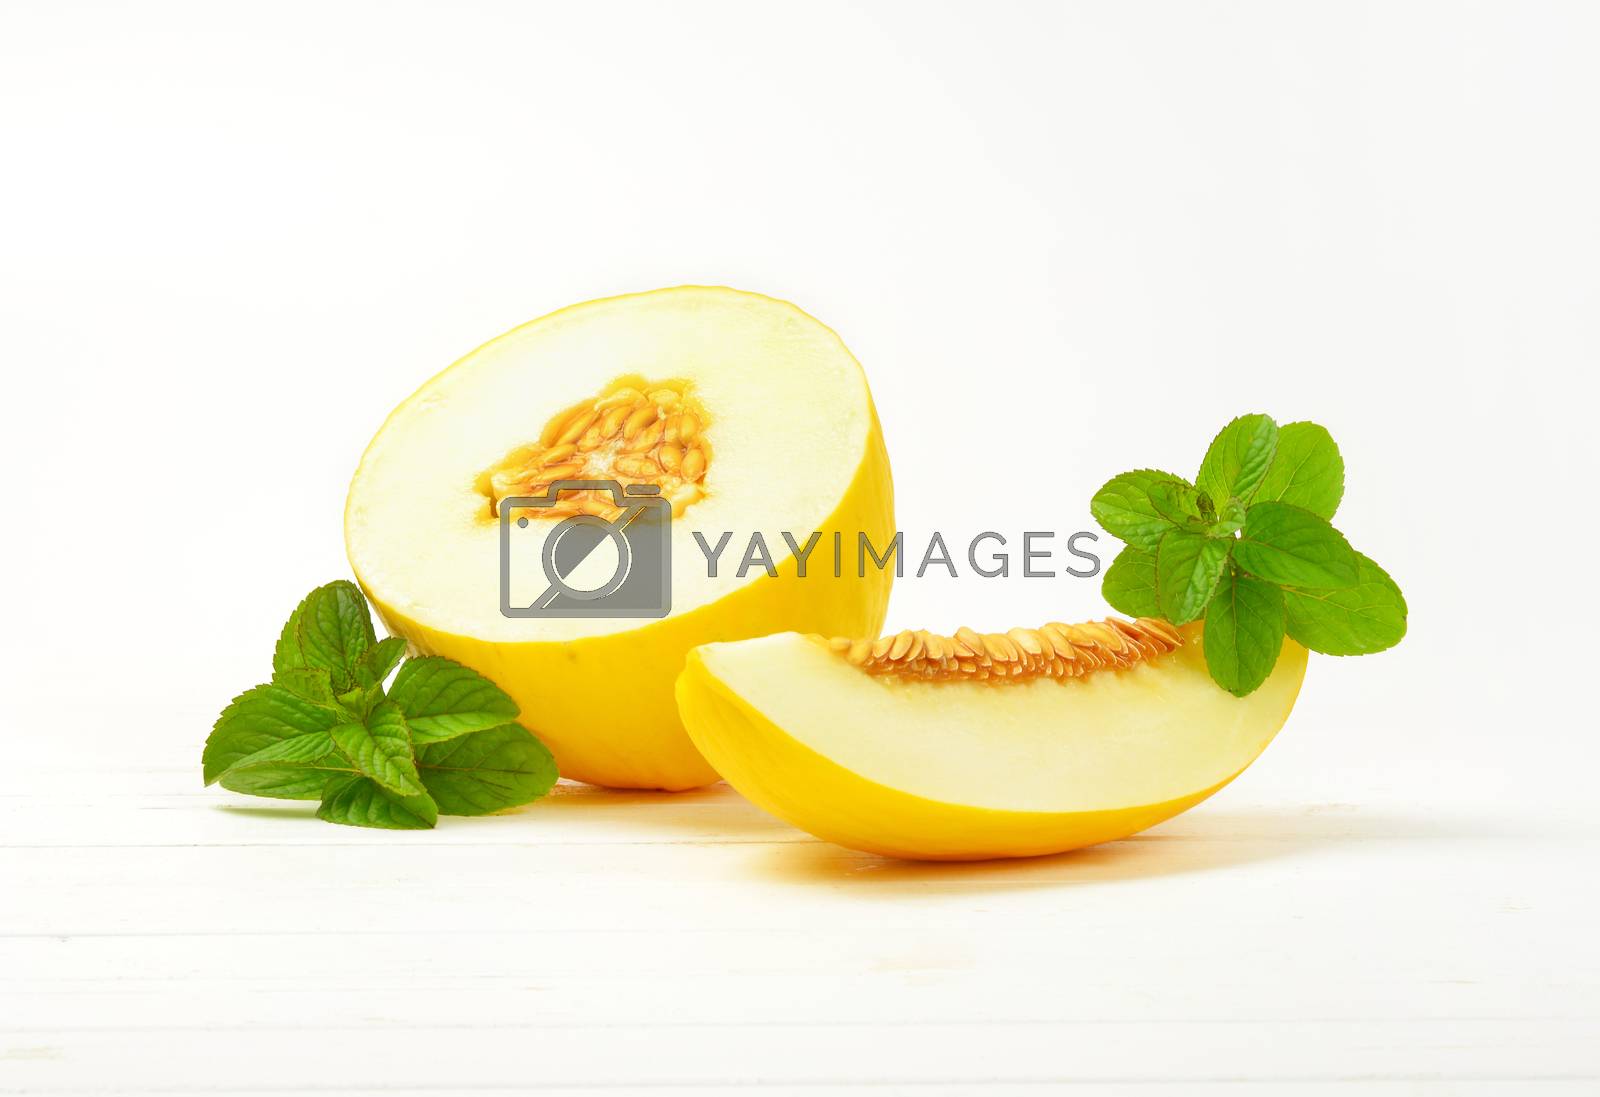 Royalty free image of fresh yellow melon by Digifoodstock